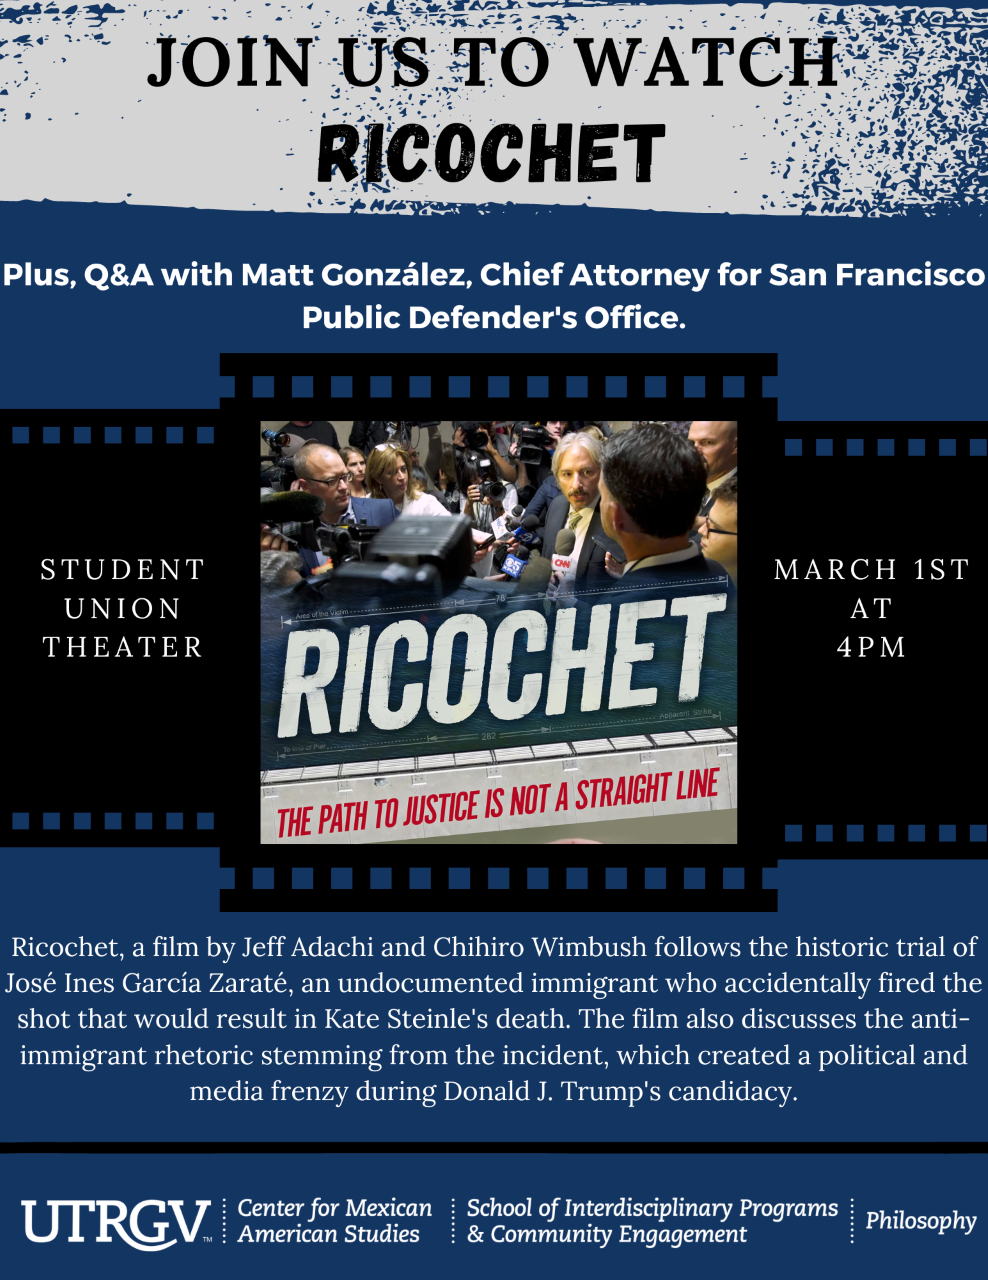 Please join us to watch Ricochet